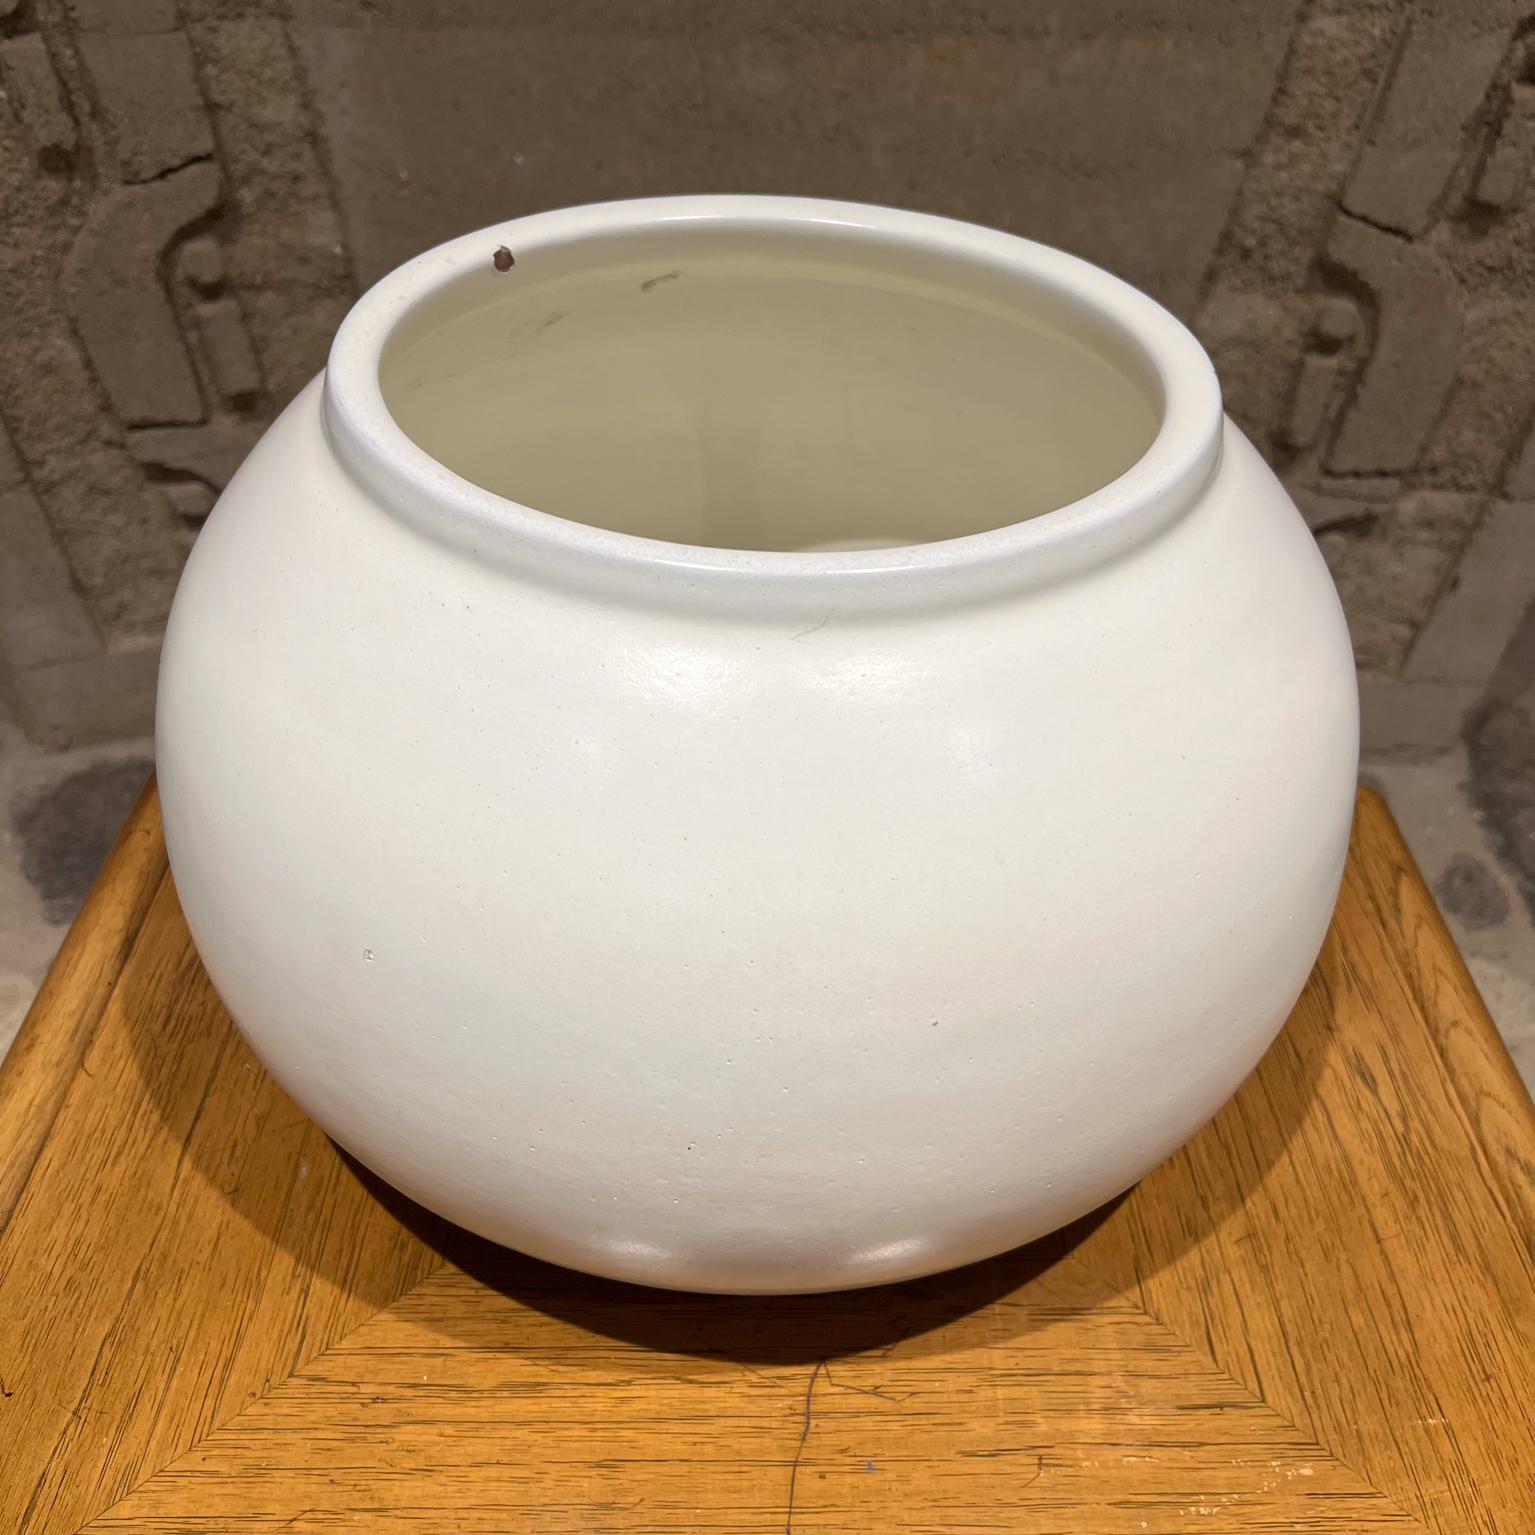 1970s Modernist Architectural pottery white sphere planter pot.
10.5 tall x 14.5 diameter
Unmarked
Preowned vintage condition
Refer to images provided.
 